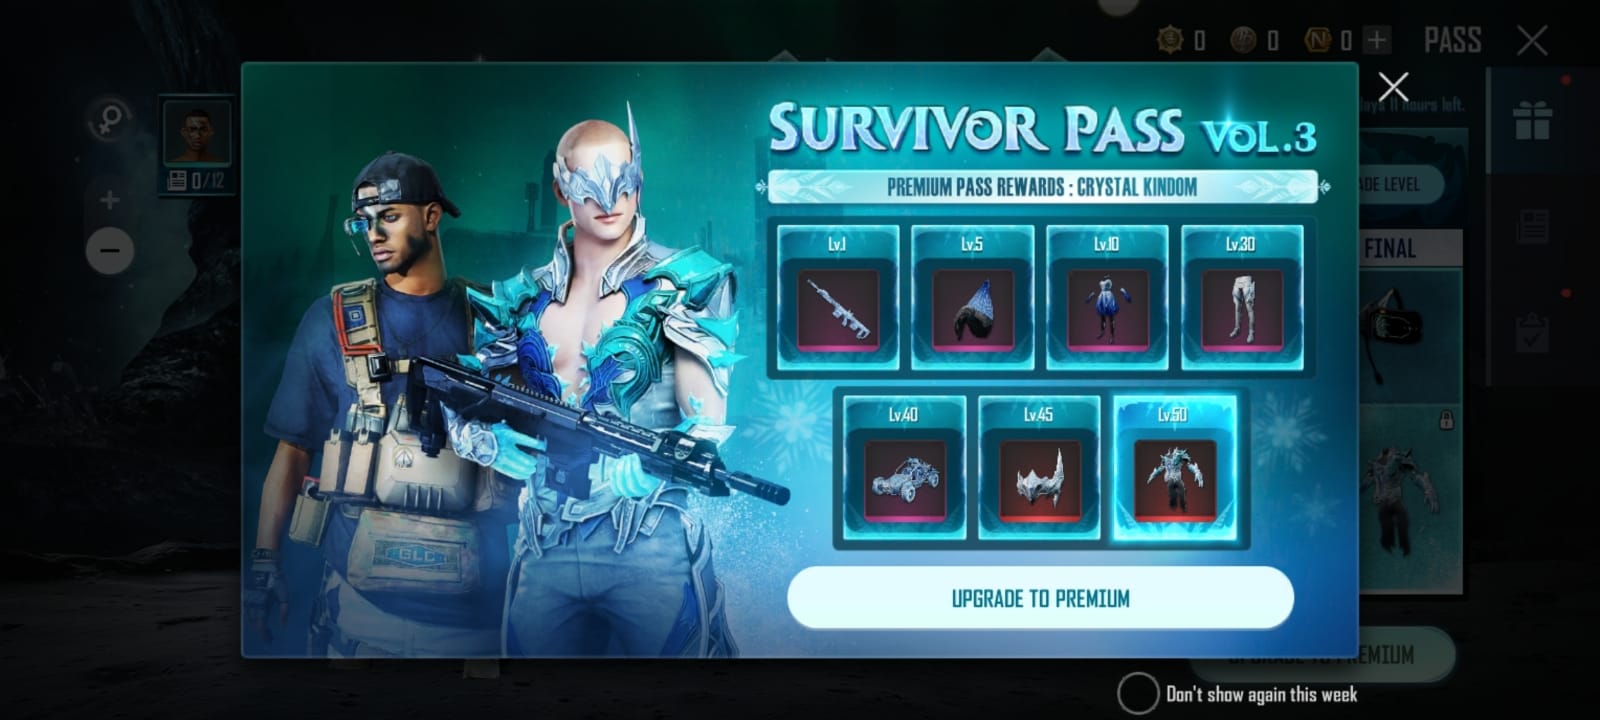 PUBG New State Survivor Pass Vol.3: Check out all the rewards and skins